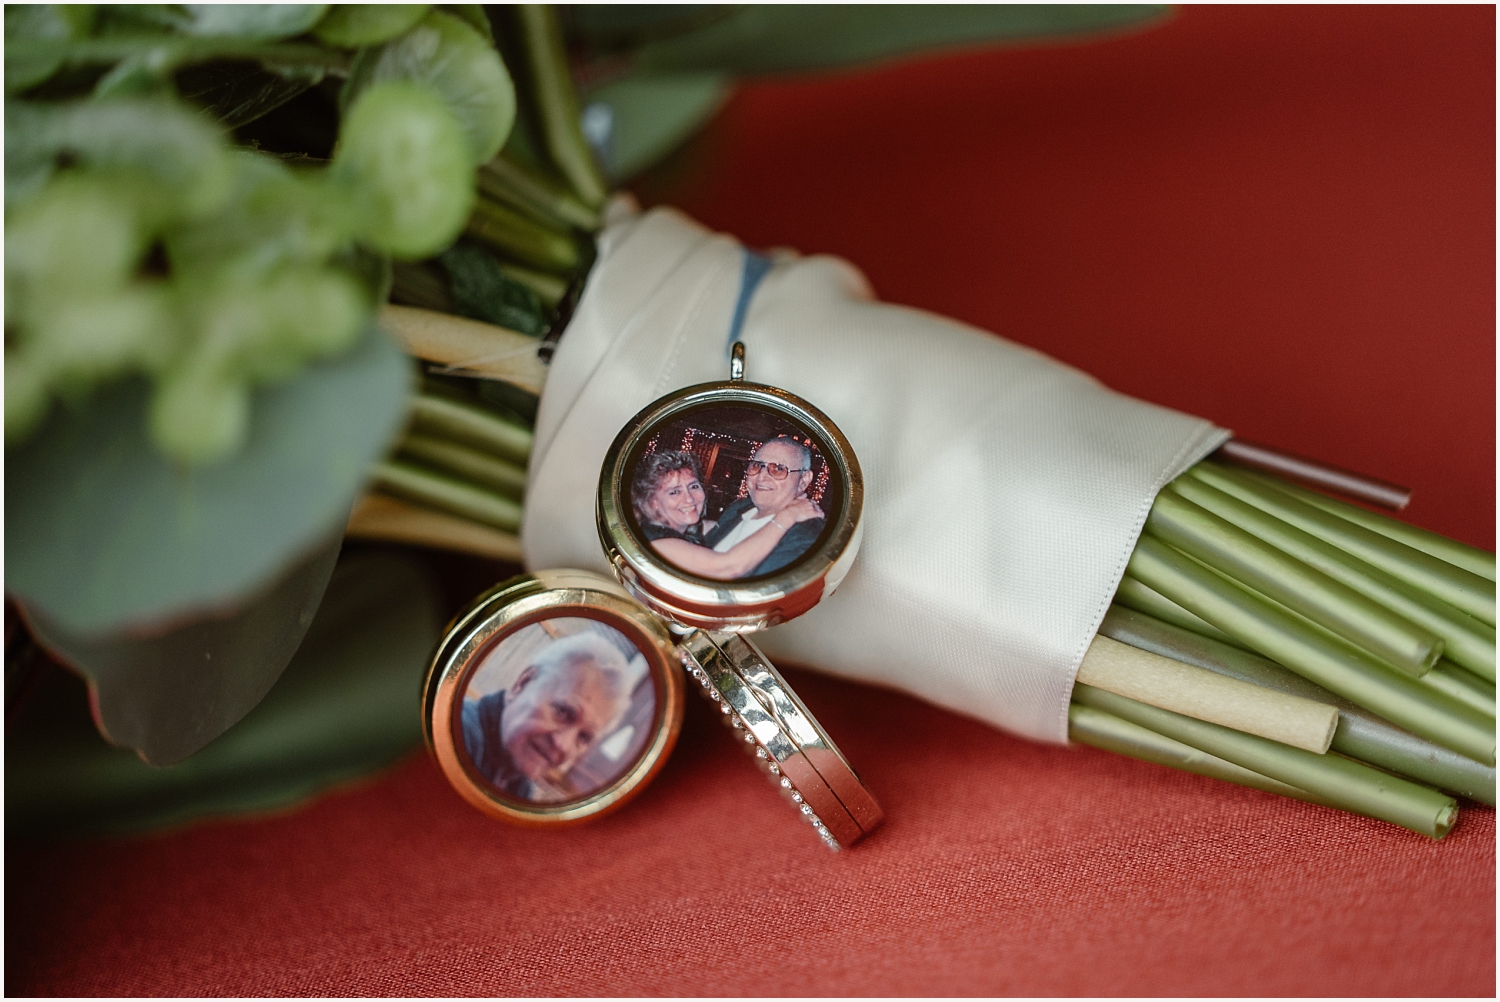 Charms on wedding bouquet with photos of loved ones